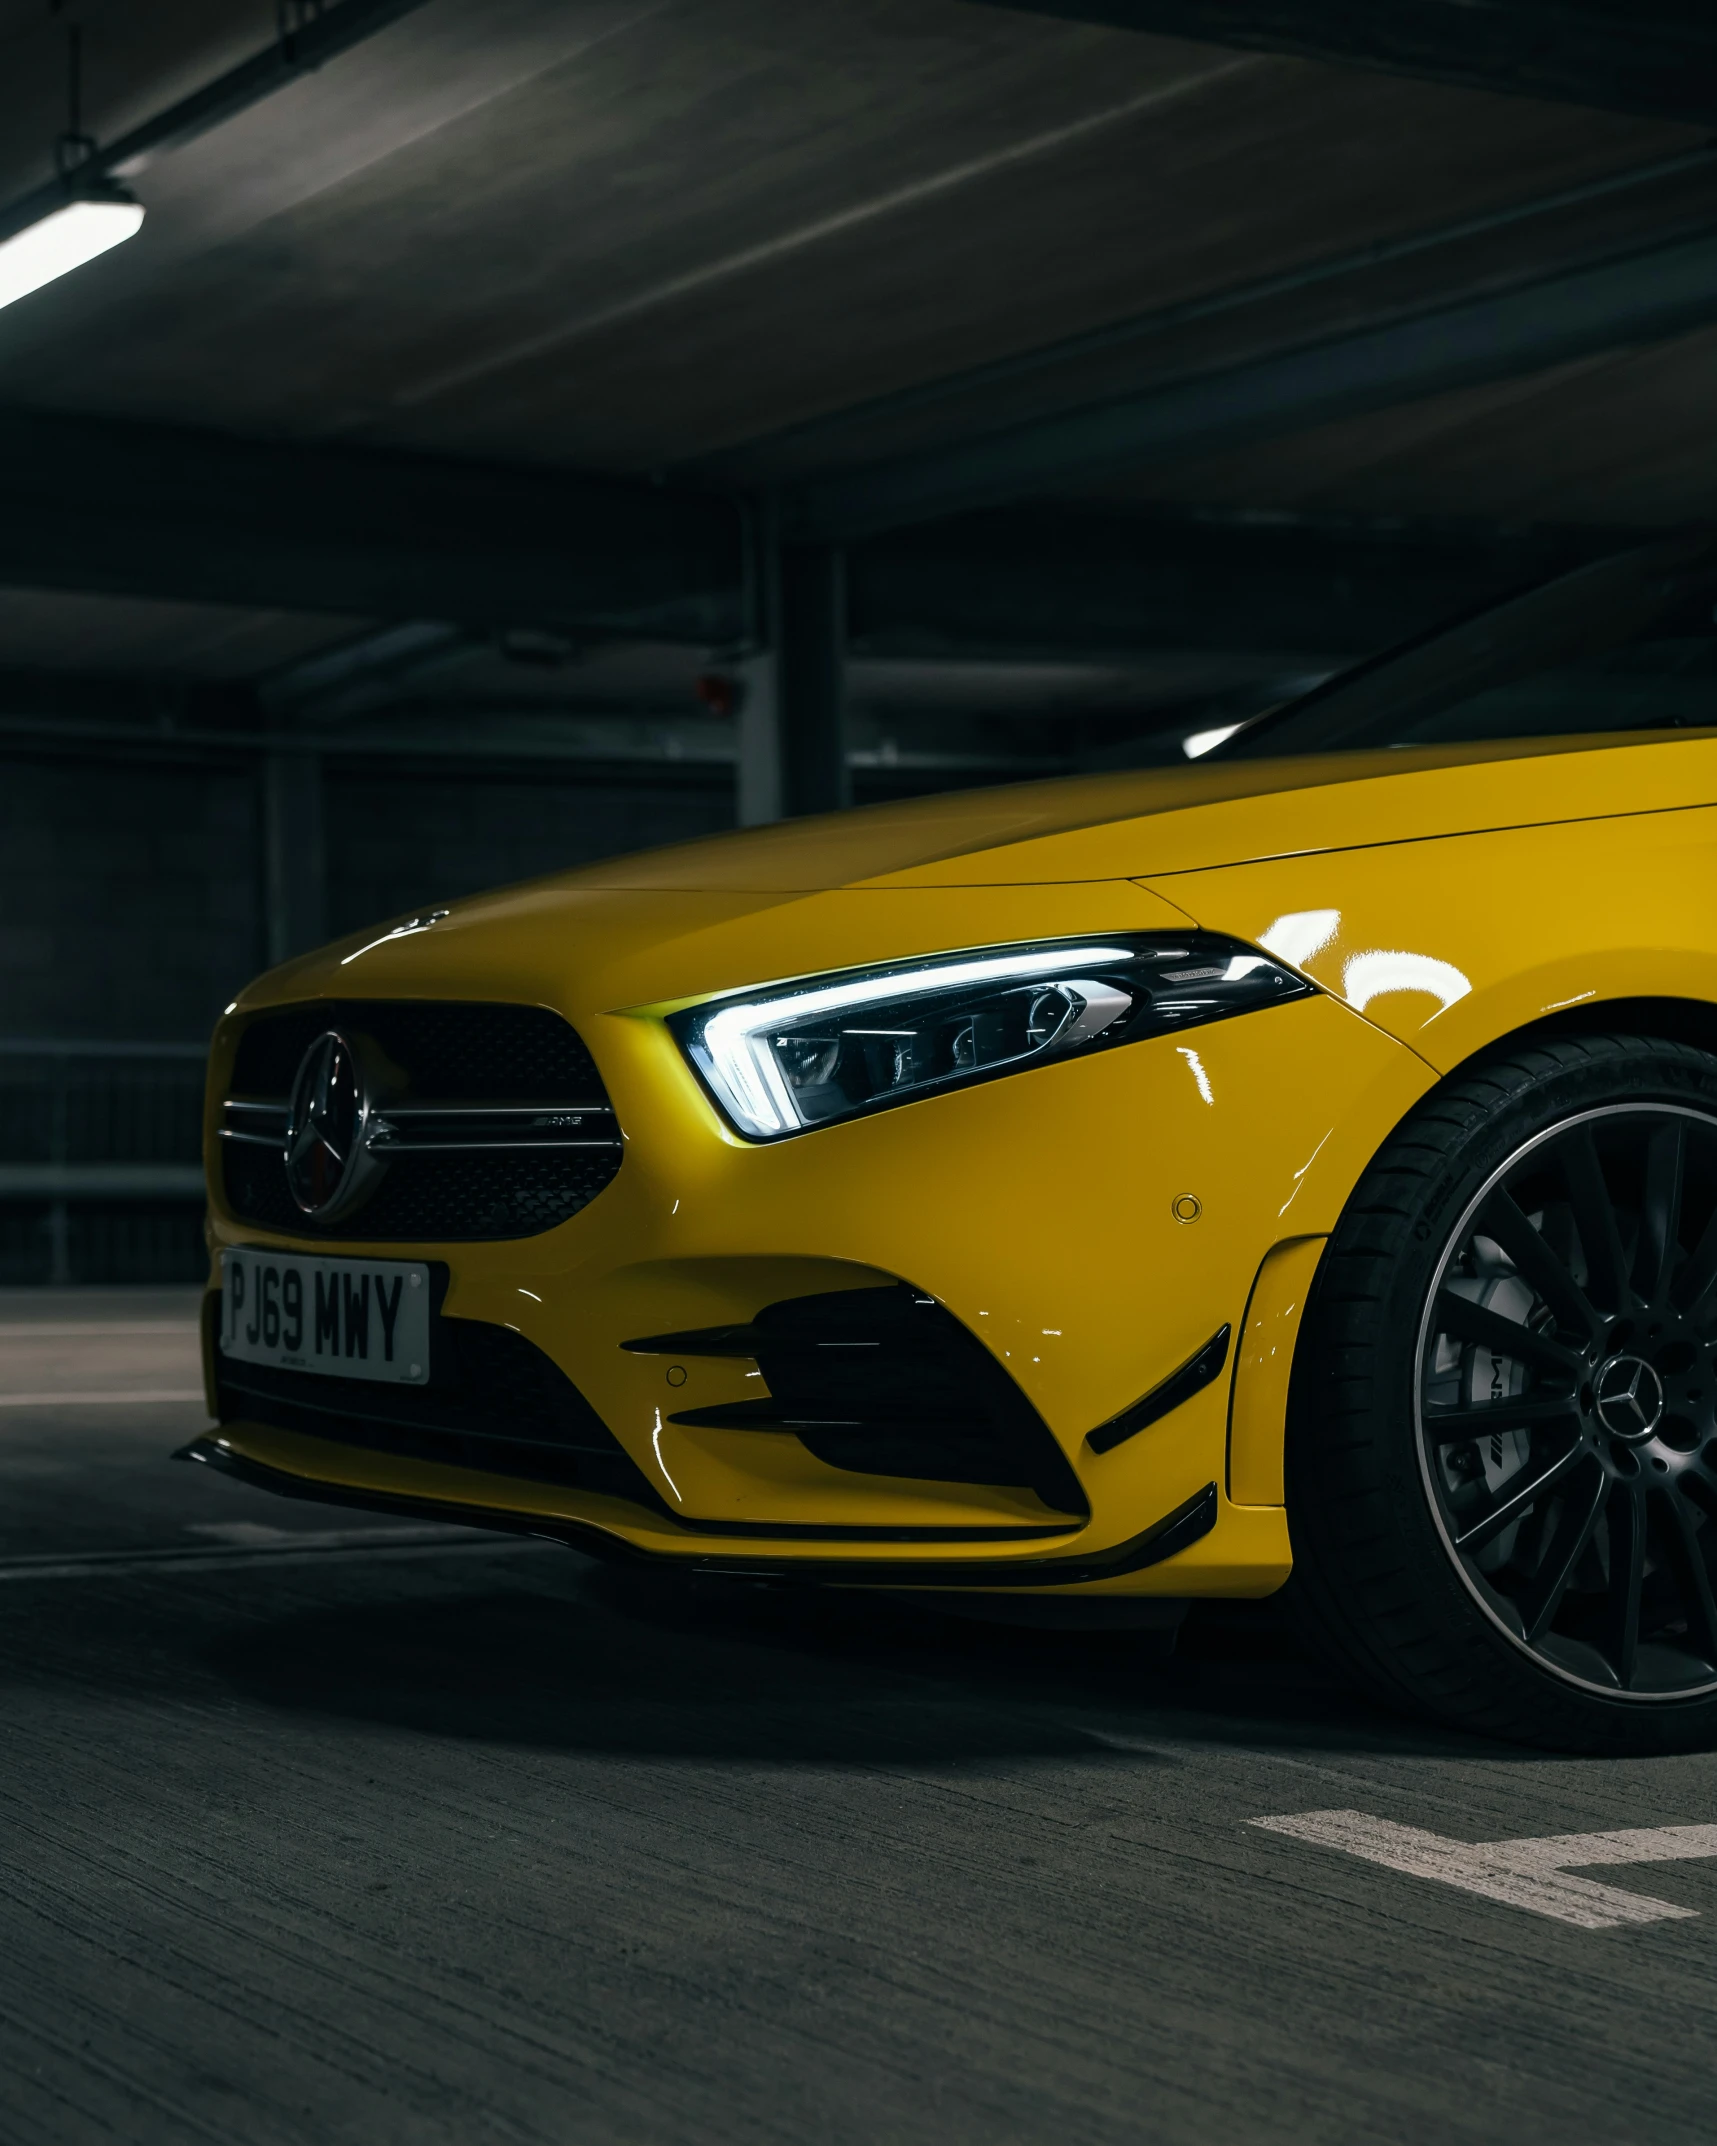 a yellow mercedes benz vehicle in a garage